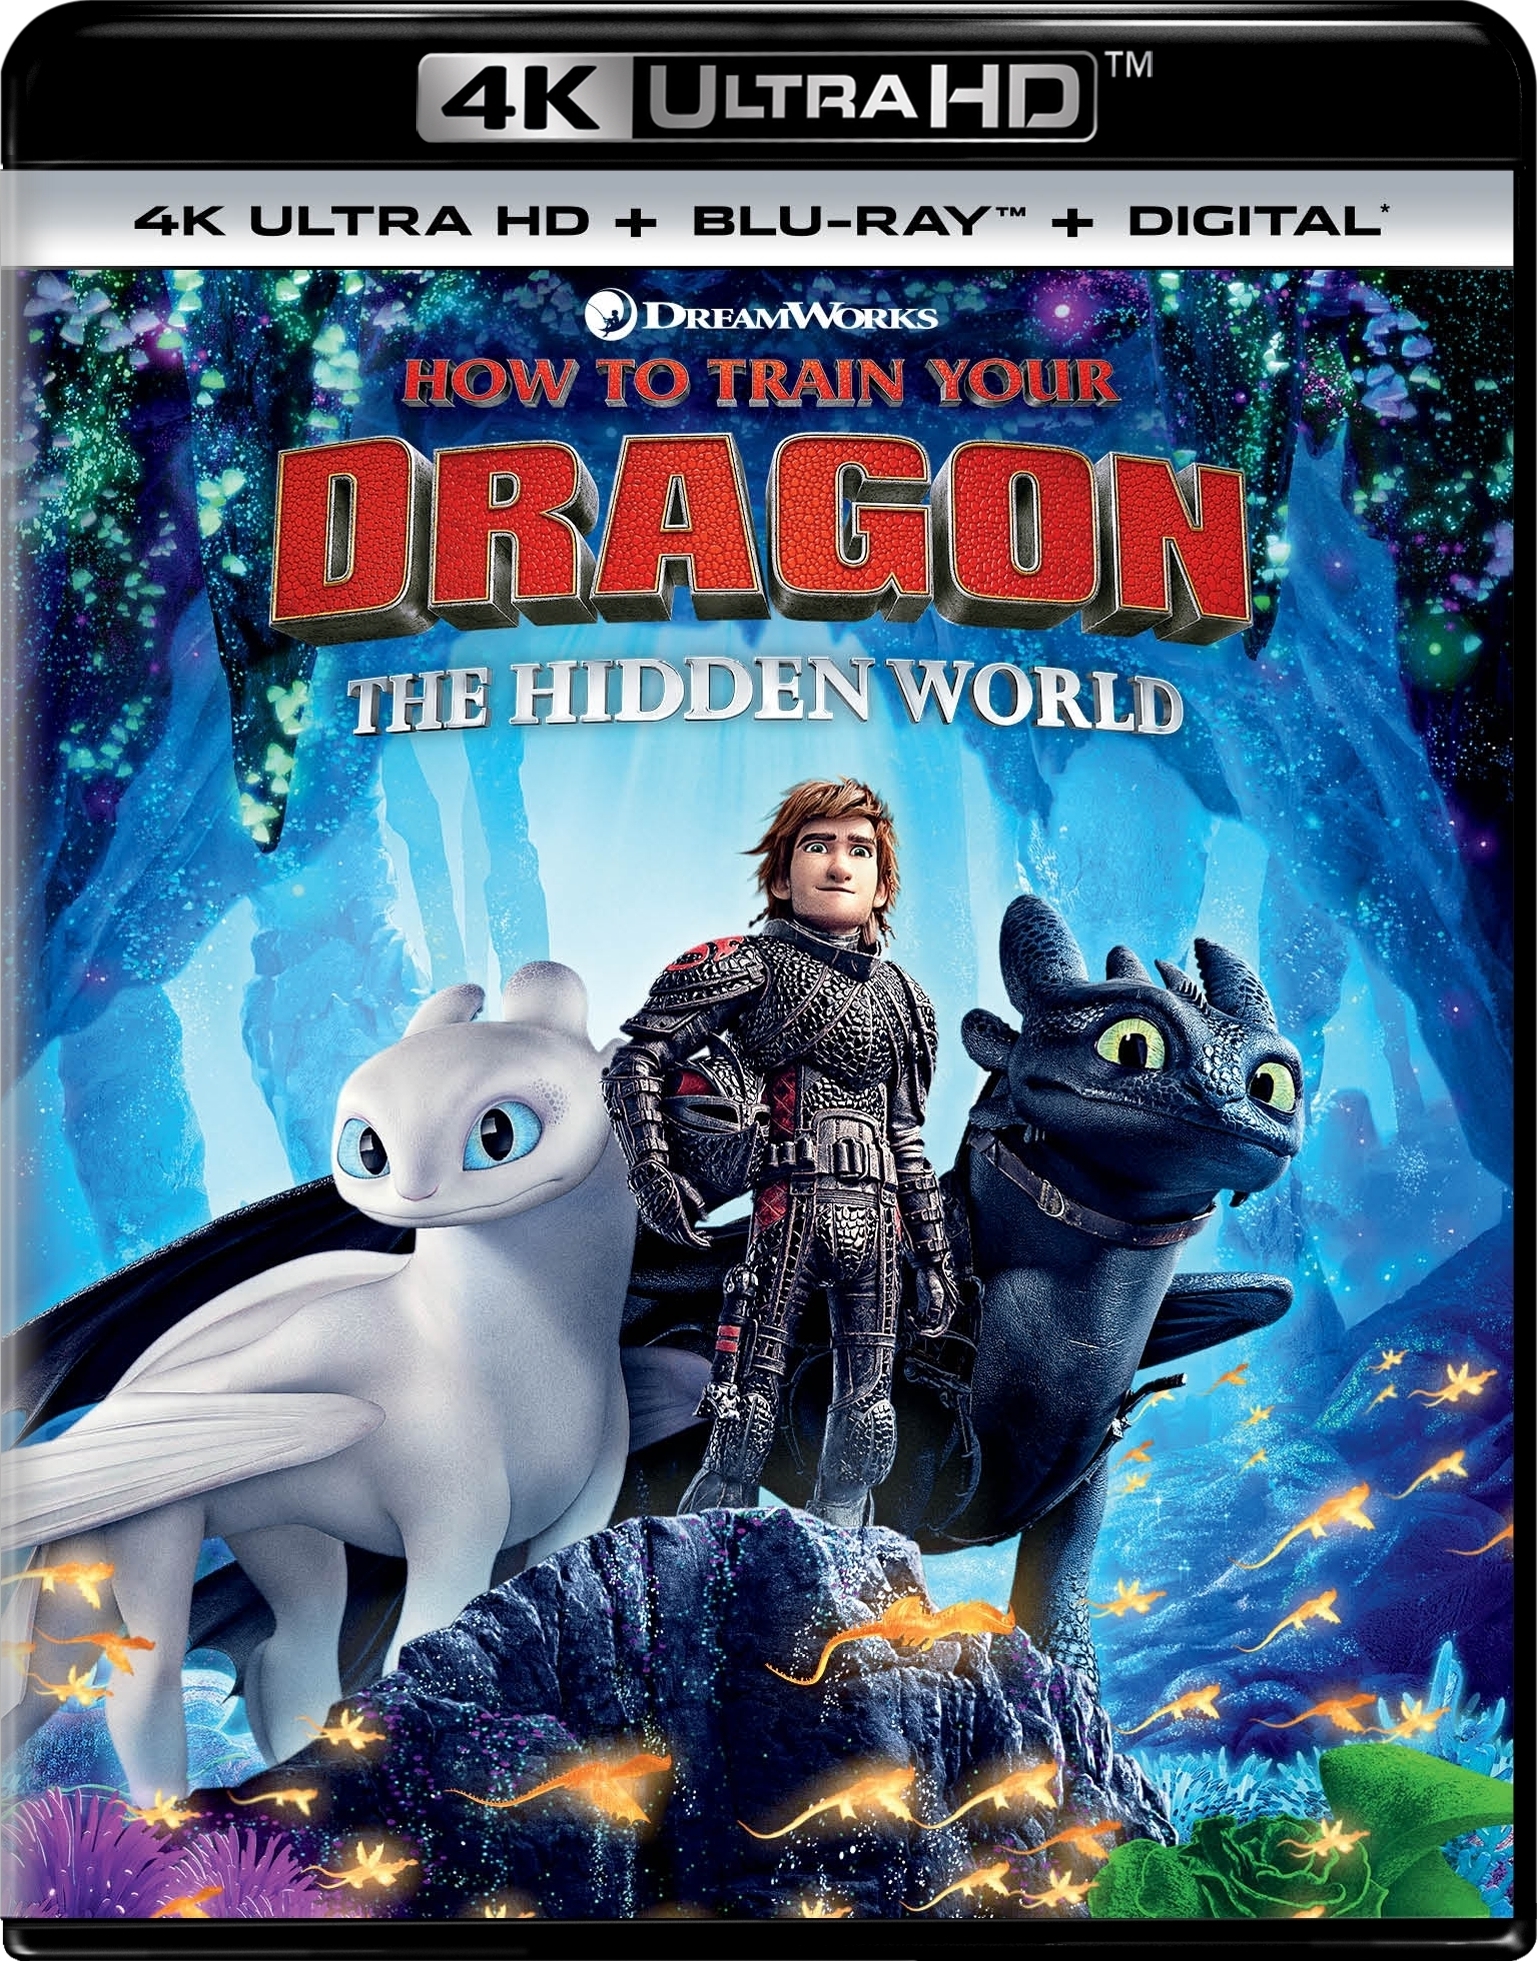 4K Ultra HD/Blu-ray Review: HOW TO TRAIN YOUR DRAGON: THE HIDDEN WORLD -  